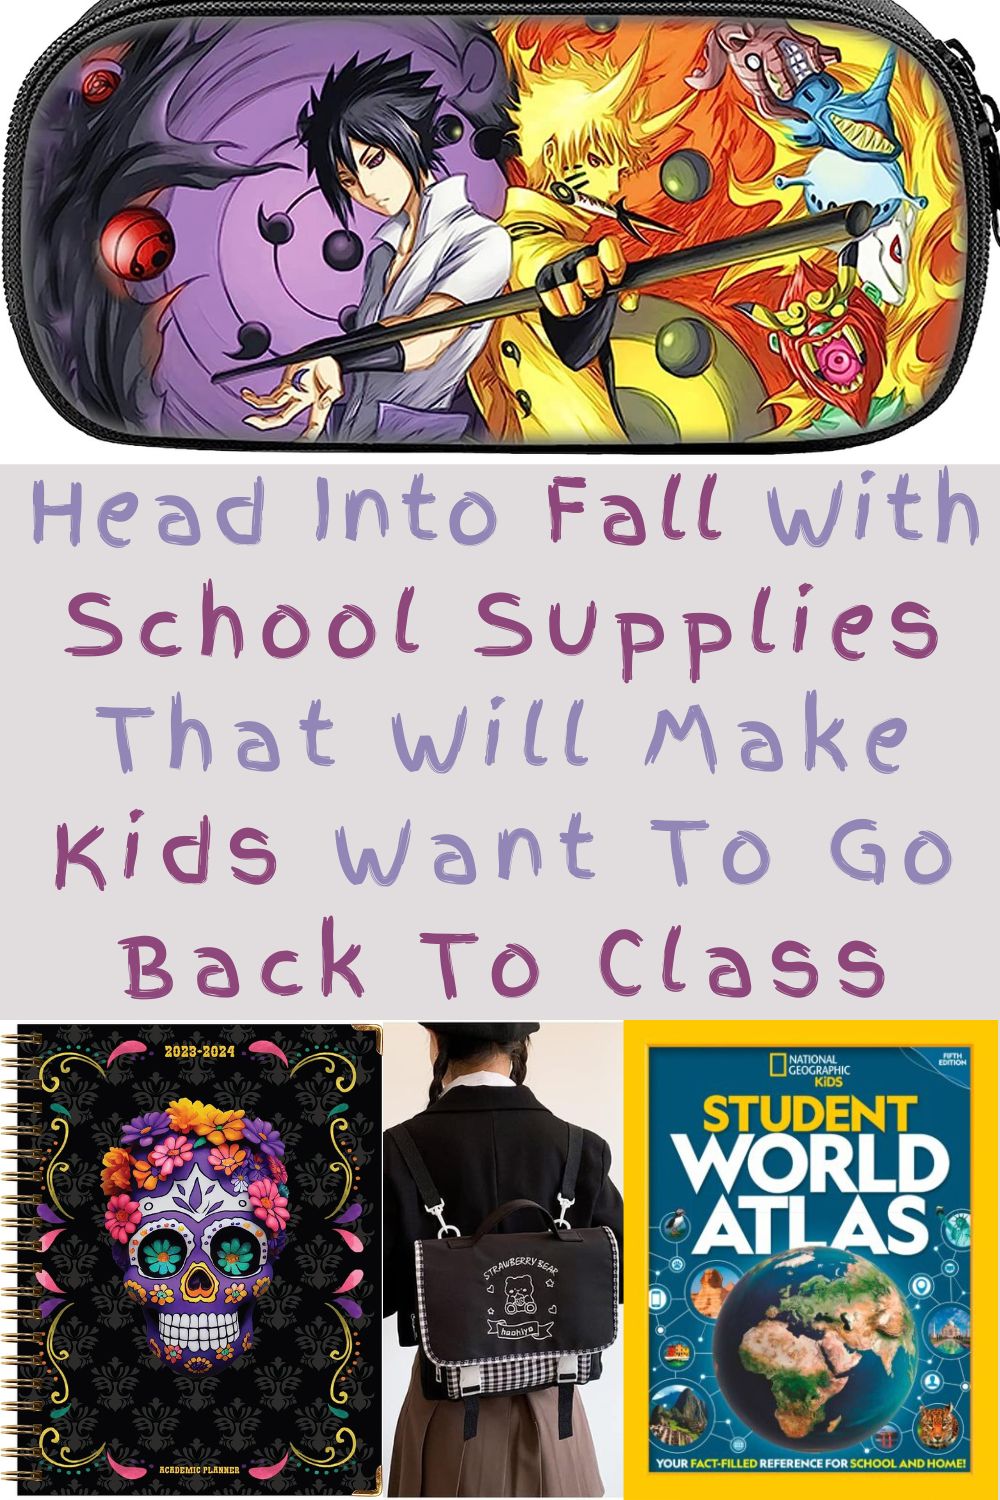 here are 14 cool back-to-school supplies your kids can get excited about. backpacks, pencil cases, gel pens and lunch bags inspired by mange, anime, the day f the dead and the best of europe.